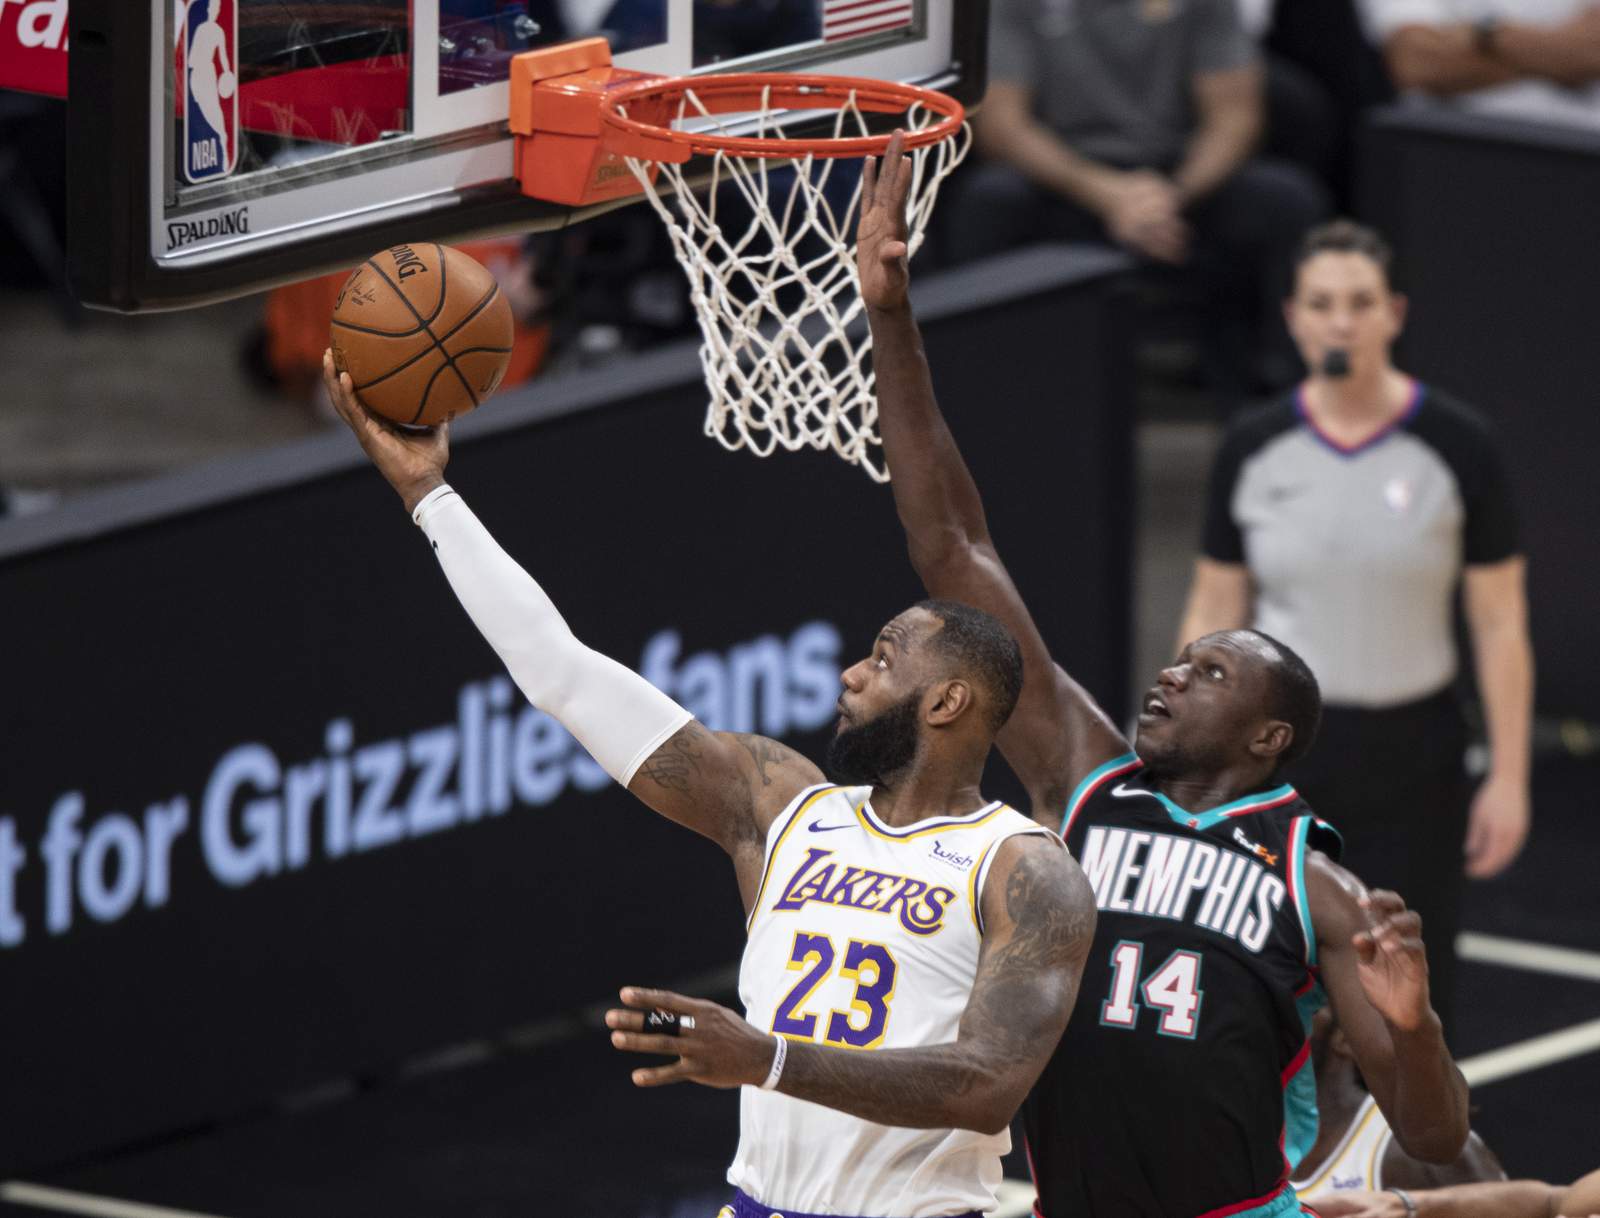 James leads Lakers past Grizzlies to open 2-game set